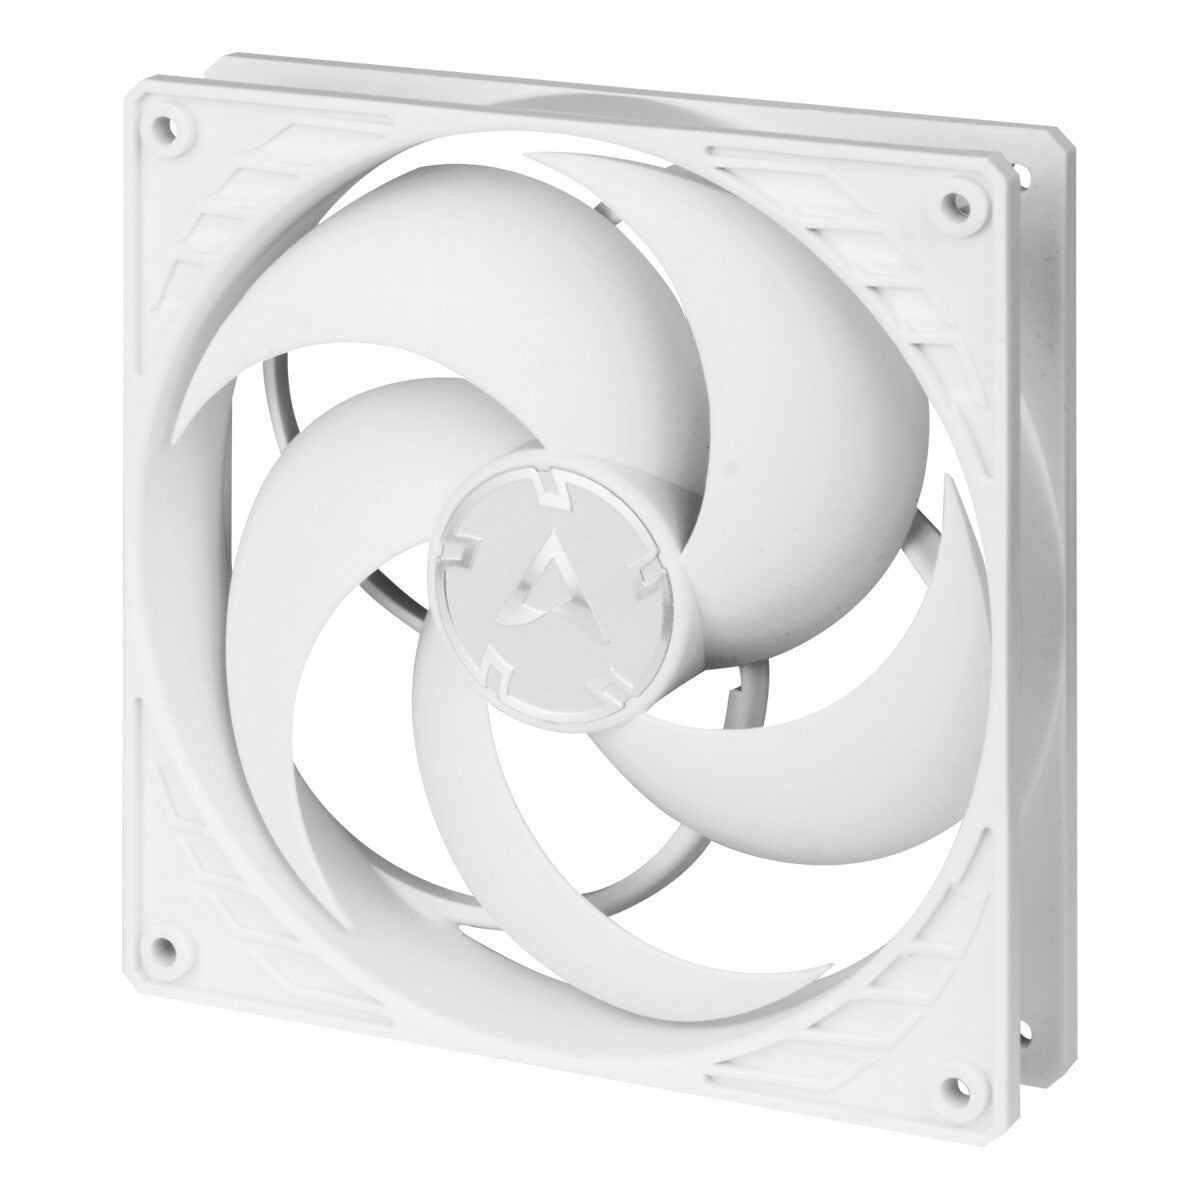 ARCTIC P14 PWM PST - Computer Case Fan in White - 140mm